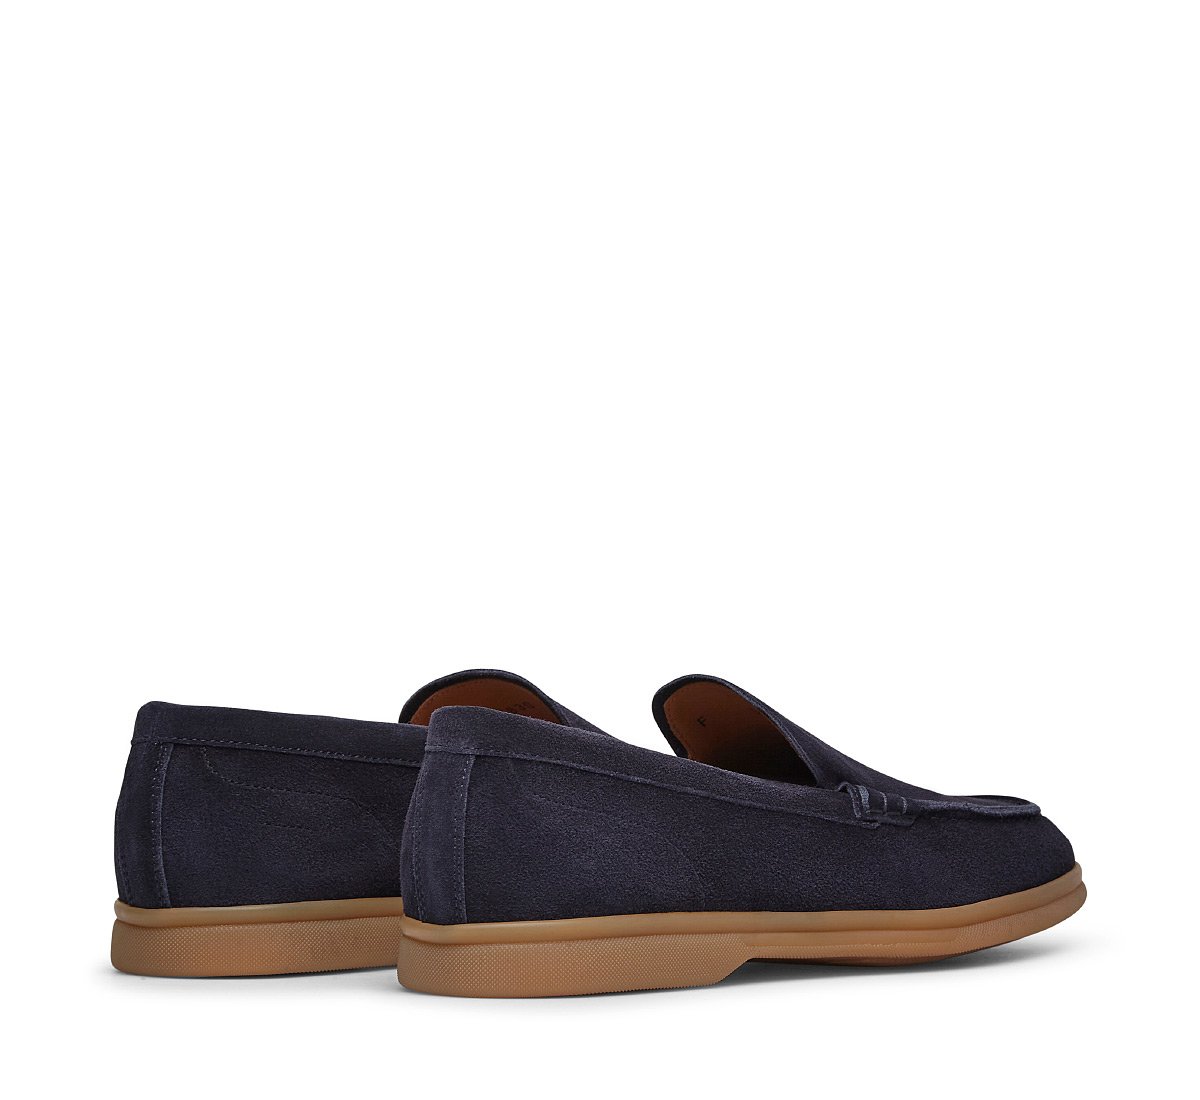 Ramsey loafer